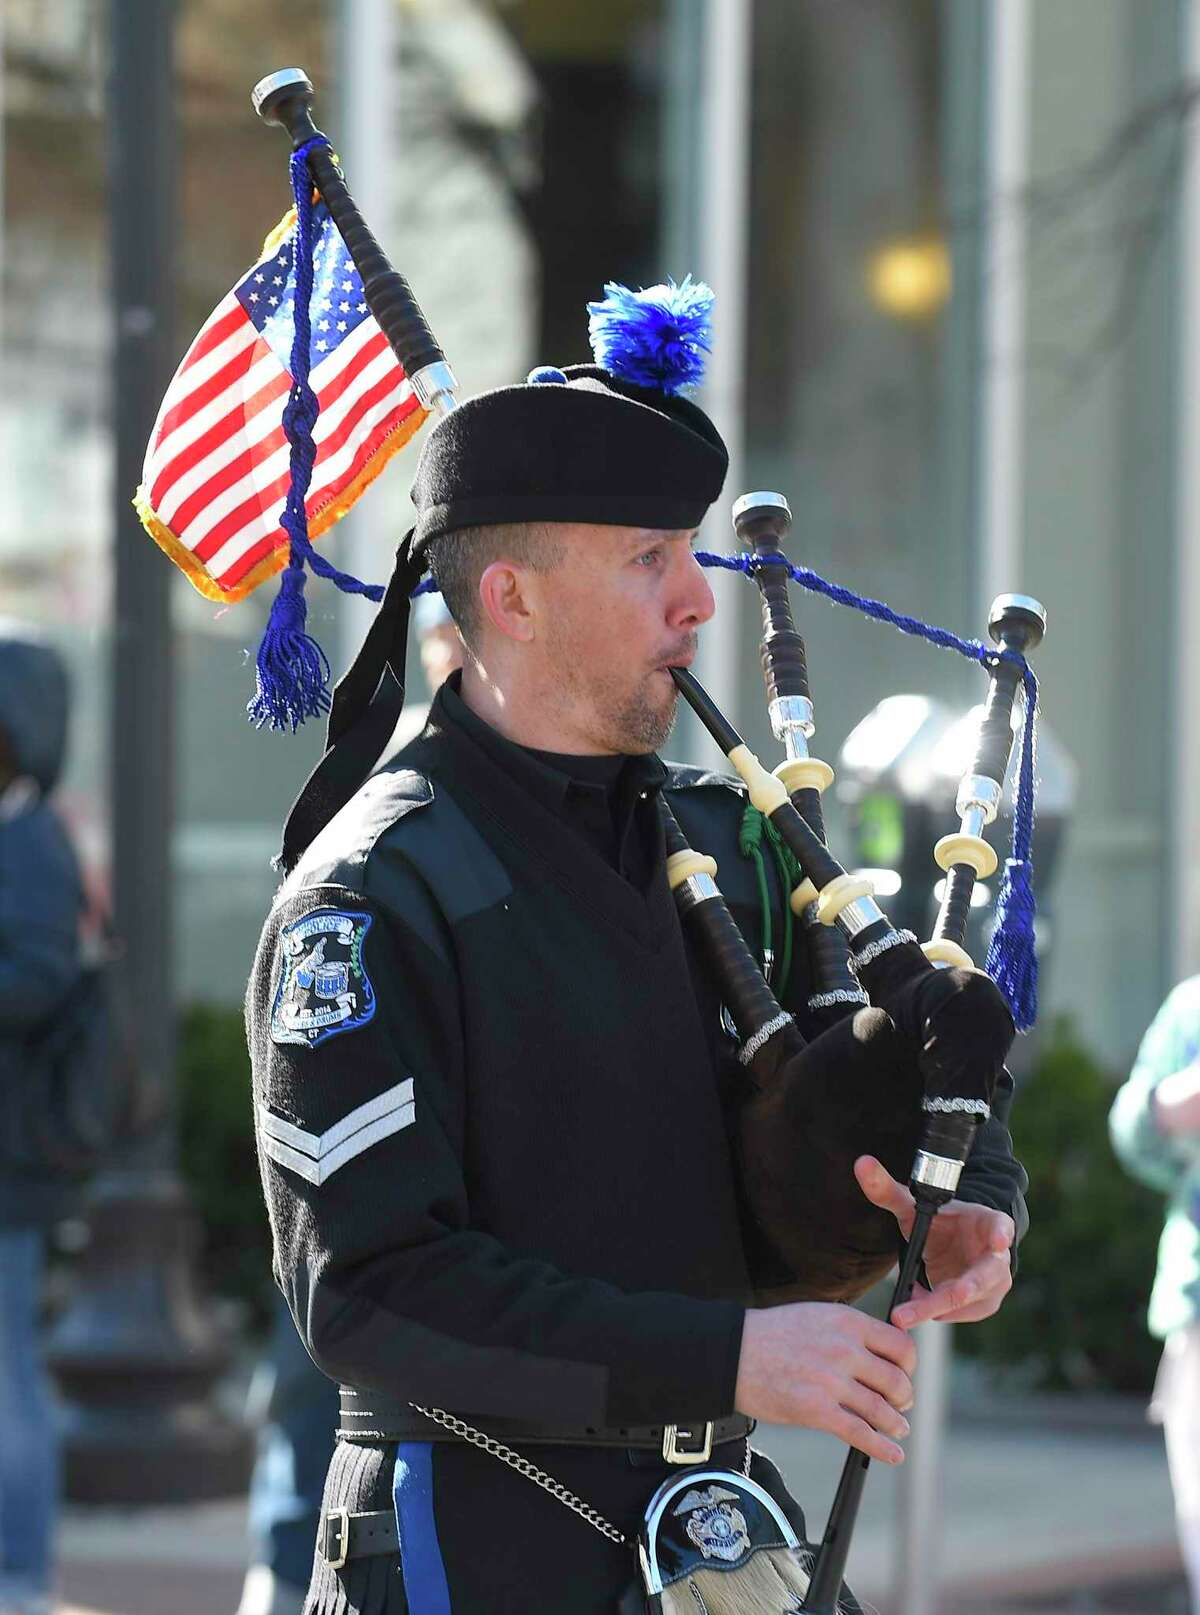 Festive scenes fill the streets with Irish Pride during the 25th Annual Stamford St. Patrick’s Day Parade on March 7, 2020 in Stamford, Connecticut.